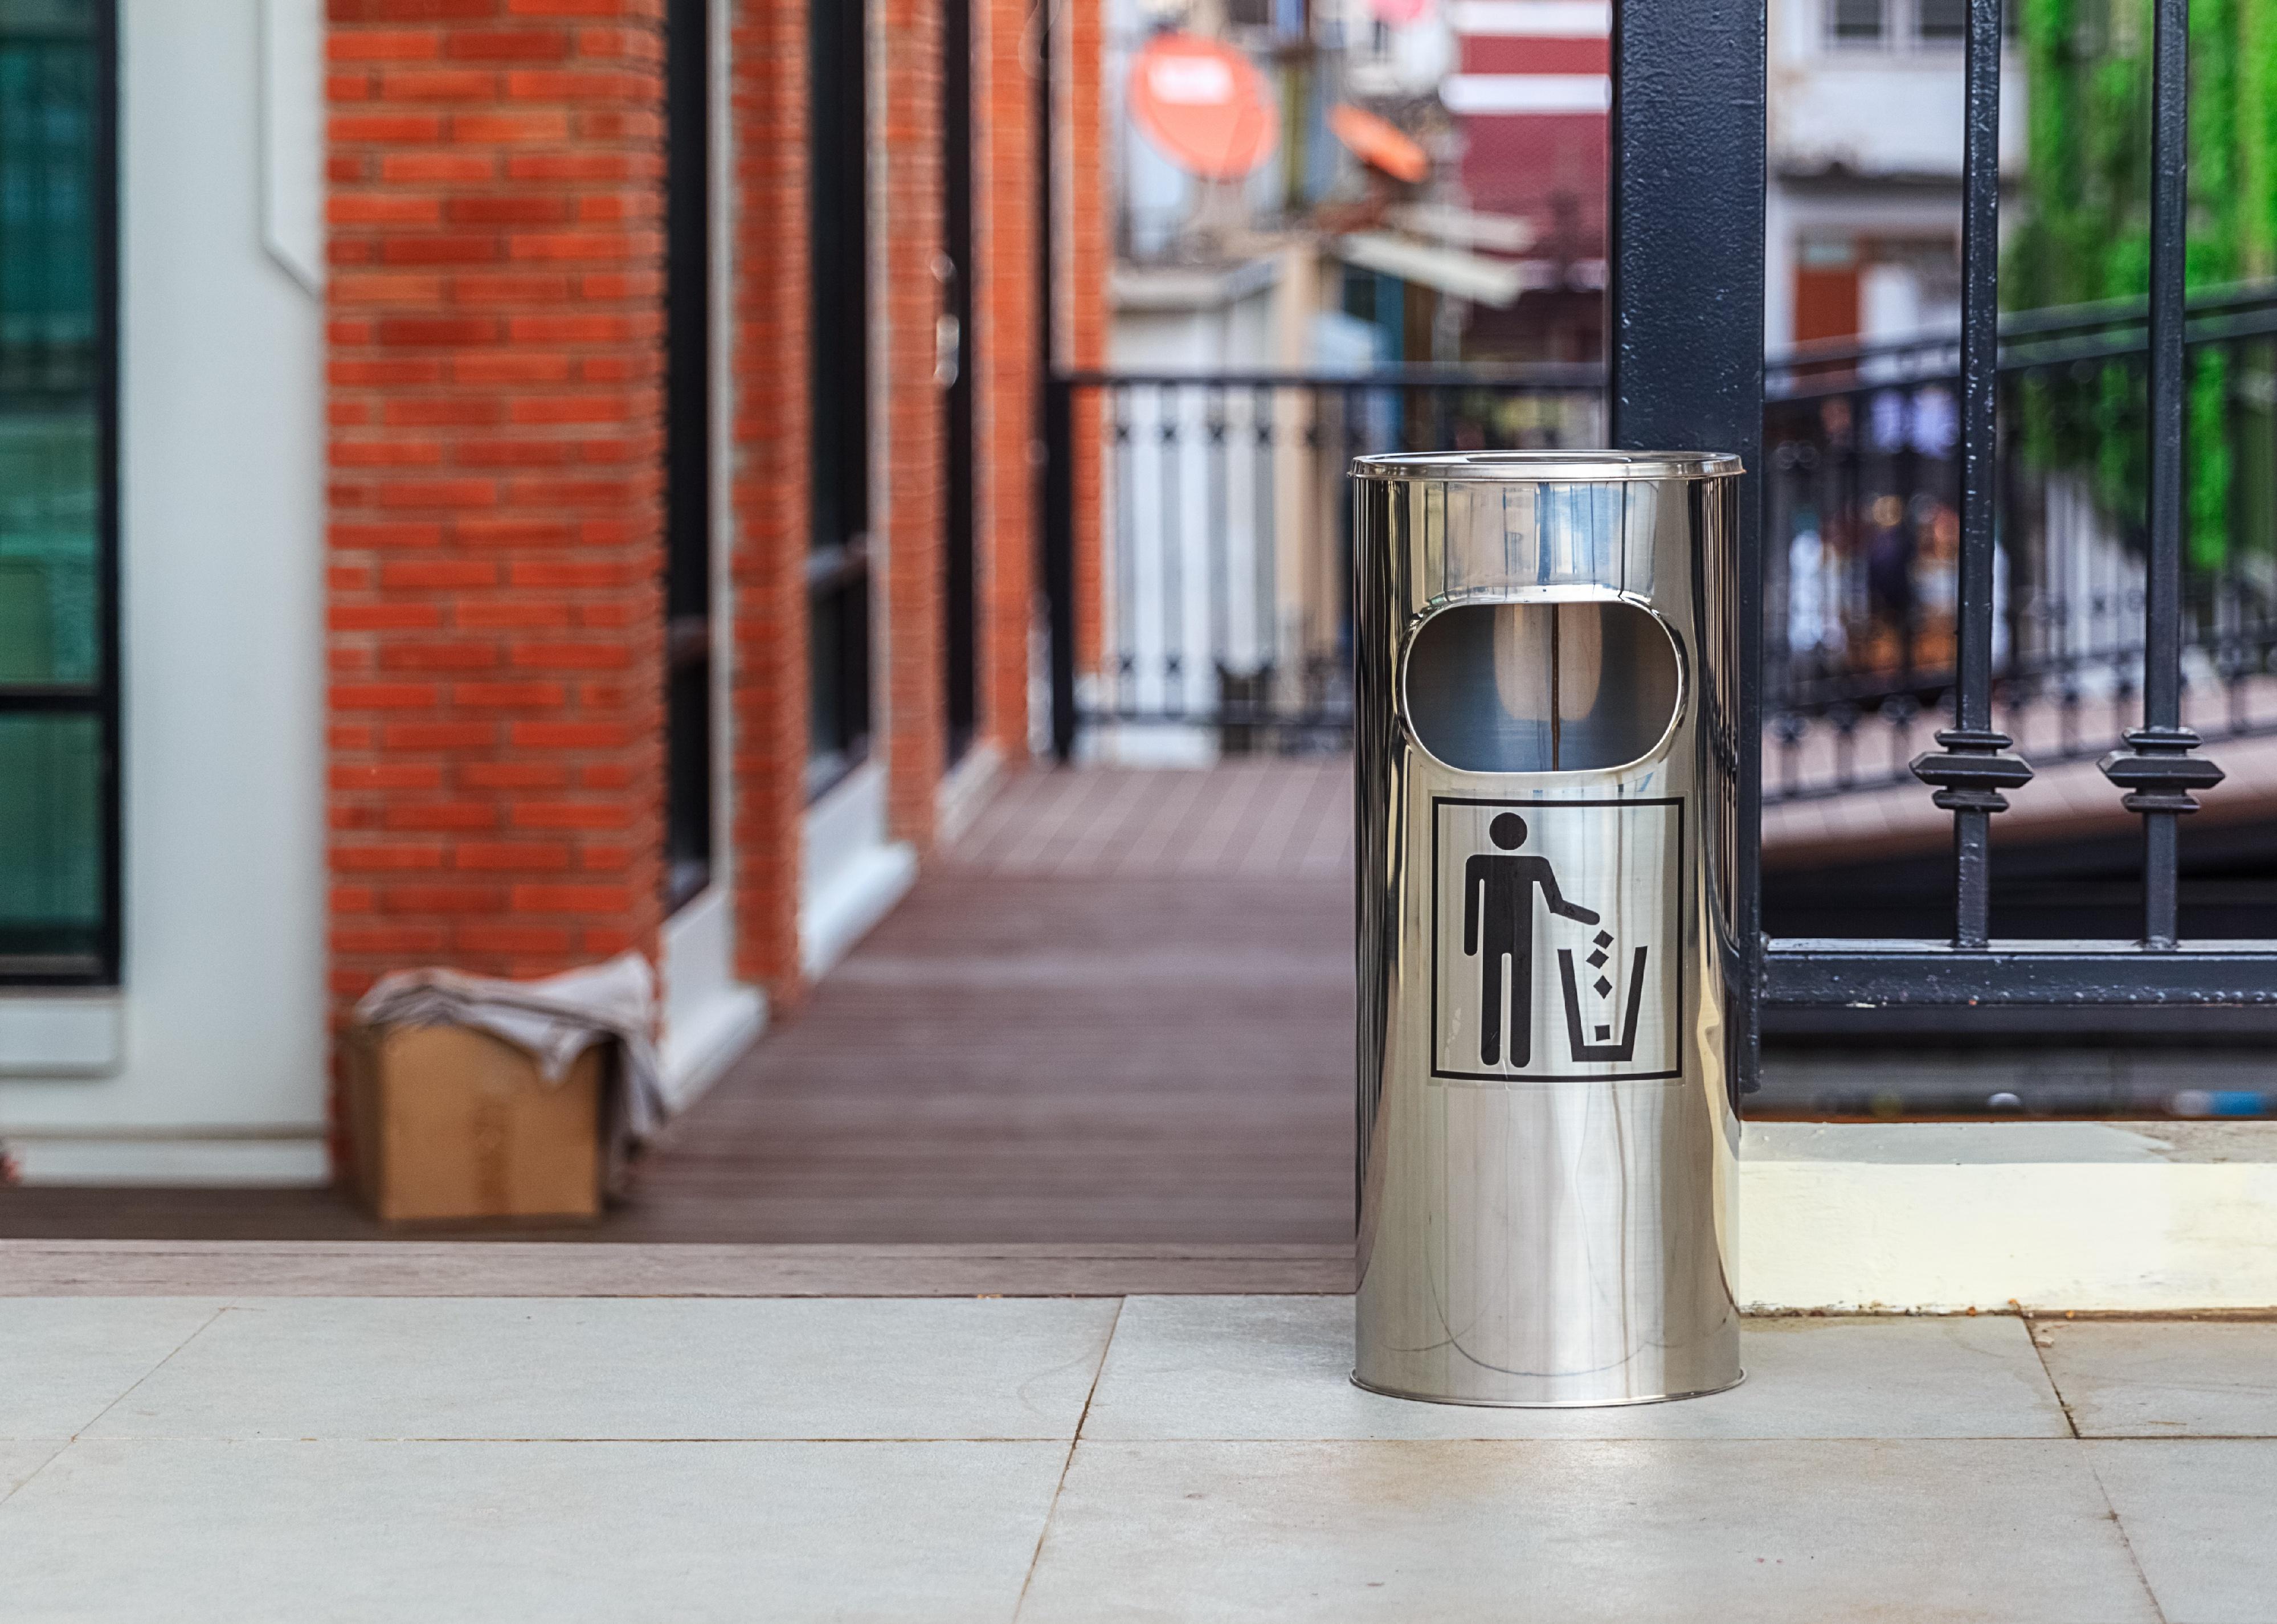 <p>Both names for these receptacles are popularly used, but those in the Pacific Northwest tend to use garbage can while those in Southern states favor trash can. <a href="https://blog.oup.com/2021/03/trash-and-its-synonyms-from-a-strictly-historical-point-of-view-part-one/">"Trash" was originally used</a> to refer to sticks, twigs, and other debris found under trees. On the other hand, <a href="https://www.vocabulary.com/dictionary/garbage">"garbage" came into use in the 15th century</a> to refer to excess parts of a fowl not able to be used in meals.</p>